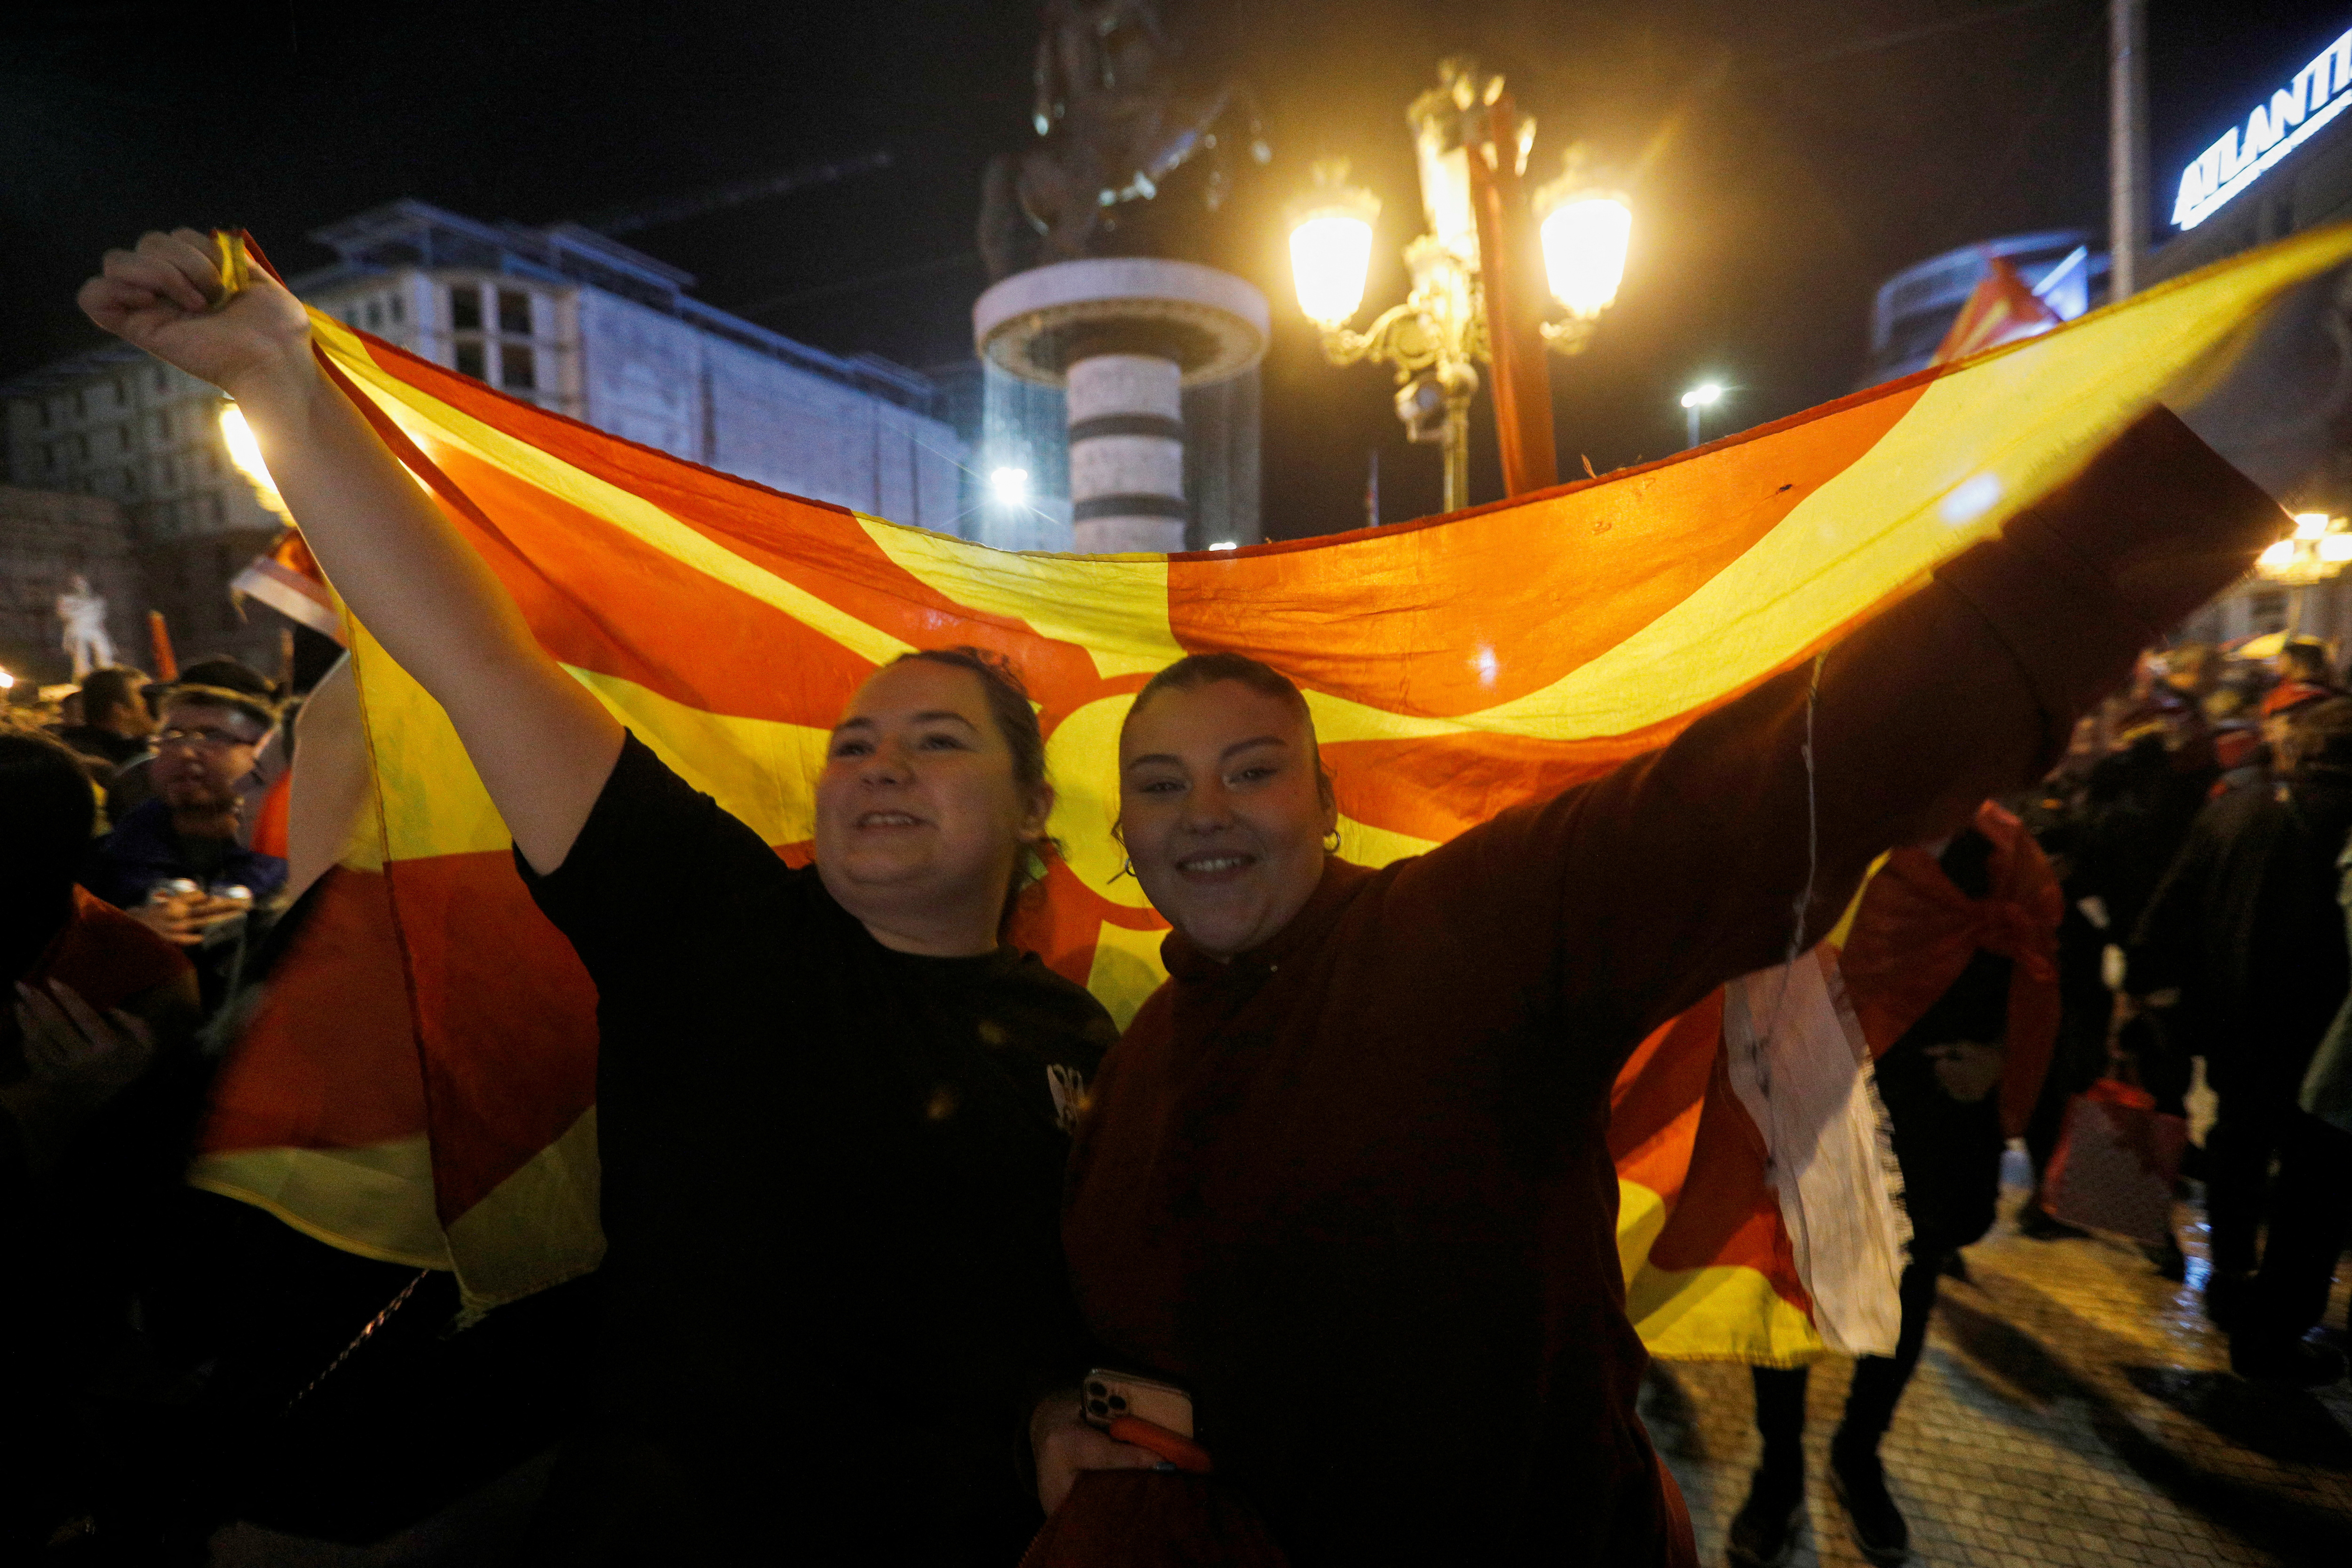 Supporters of VMRO-DPMNE party celebrate following the parliamentary and presidential elections in Skopje